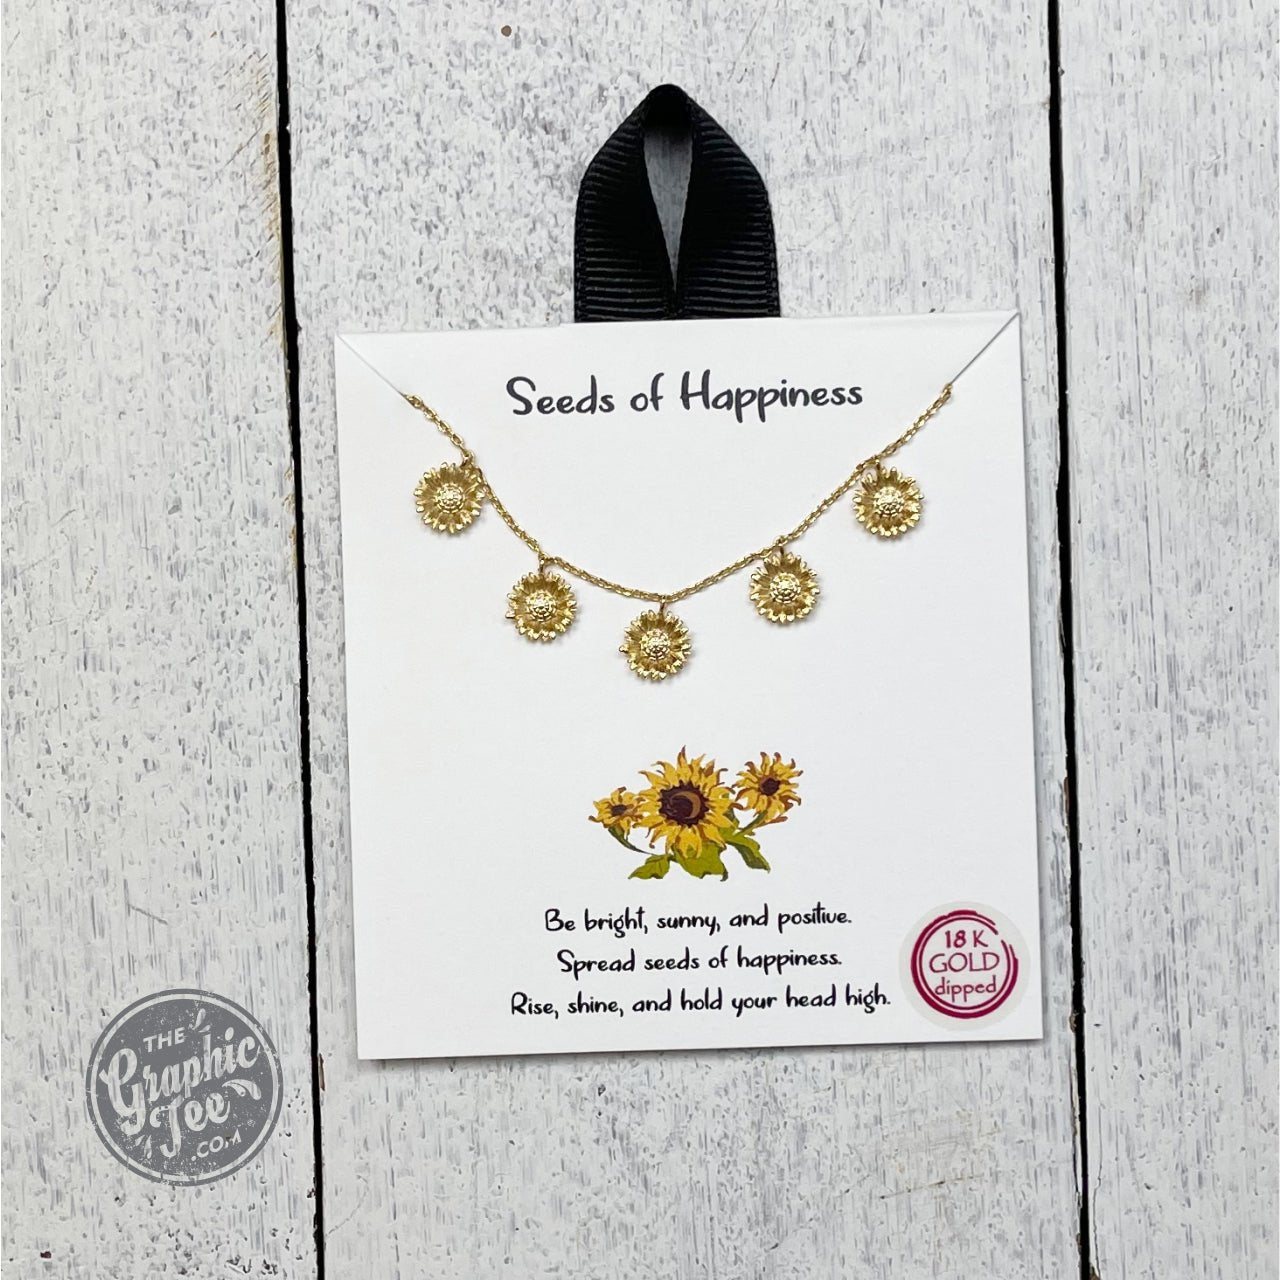 Seeds of Happiness Necklace - The Graphic Tee